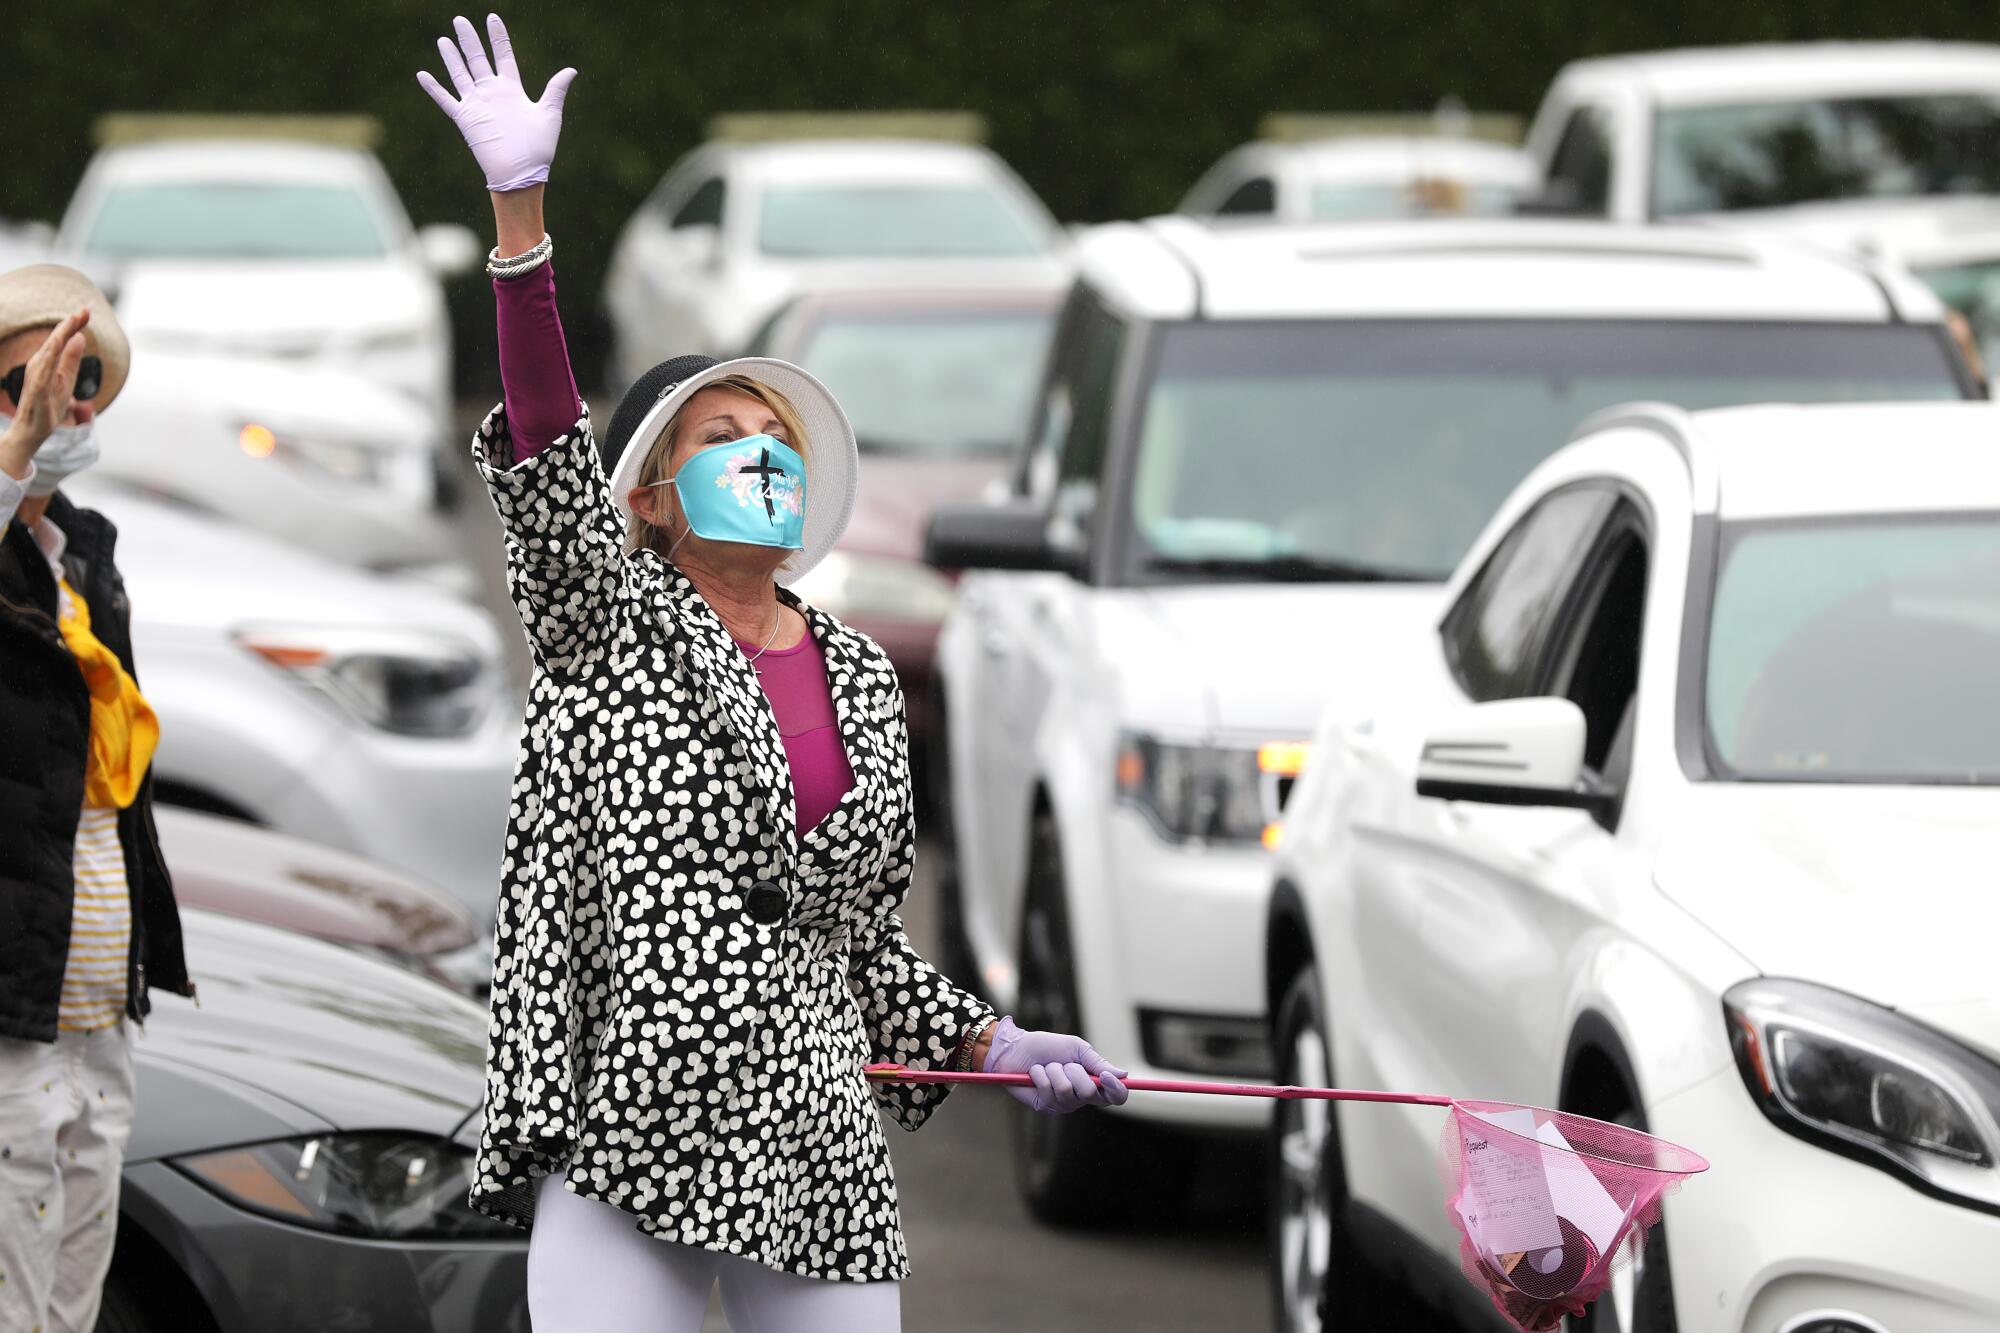 MaryAnn Lawson collects prayer requests in a Santa Ana parking lot.